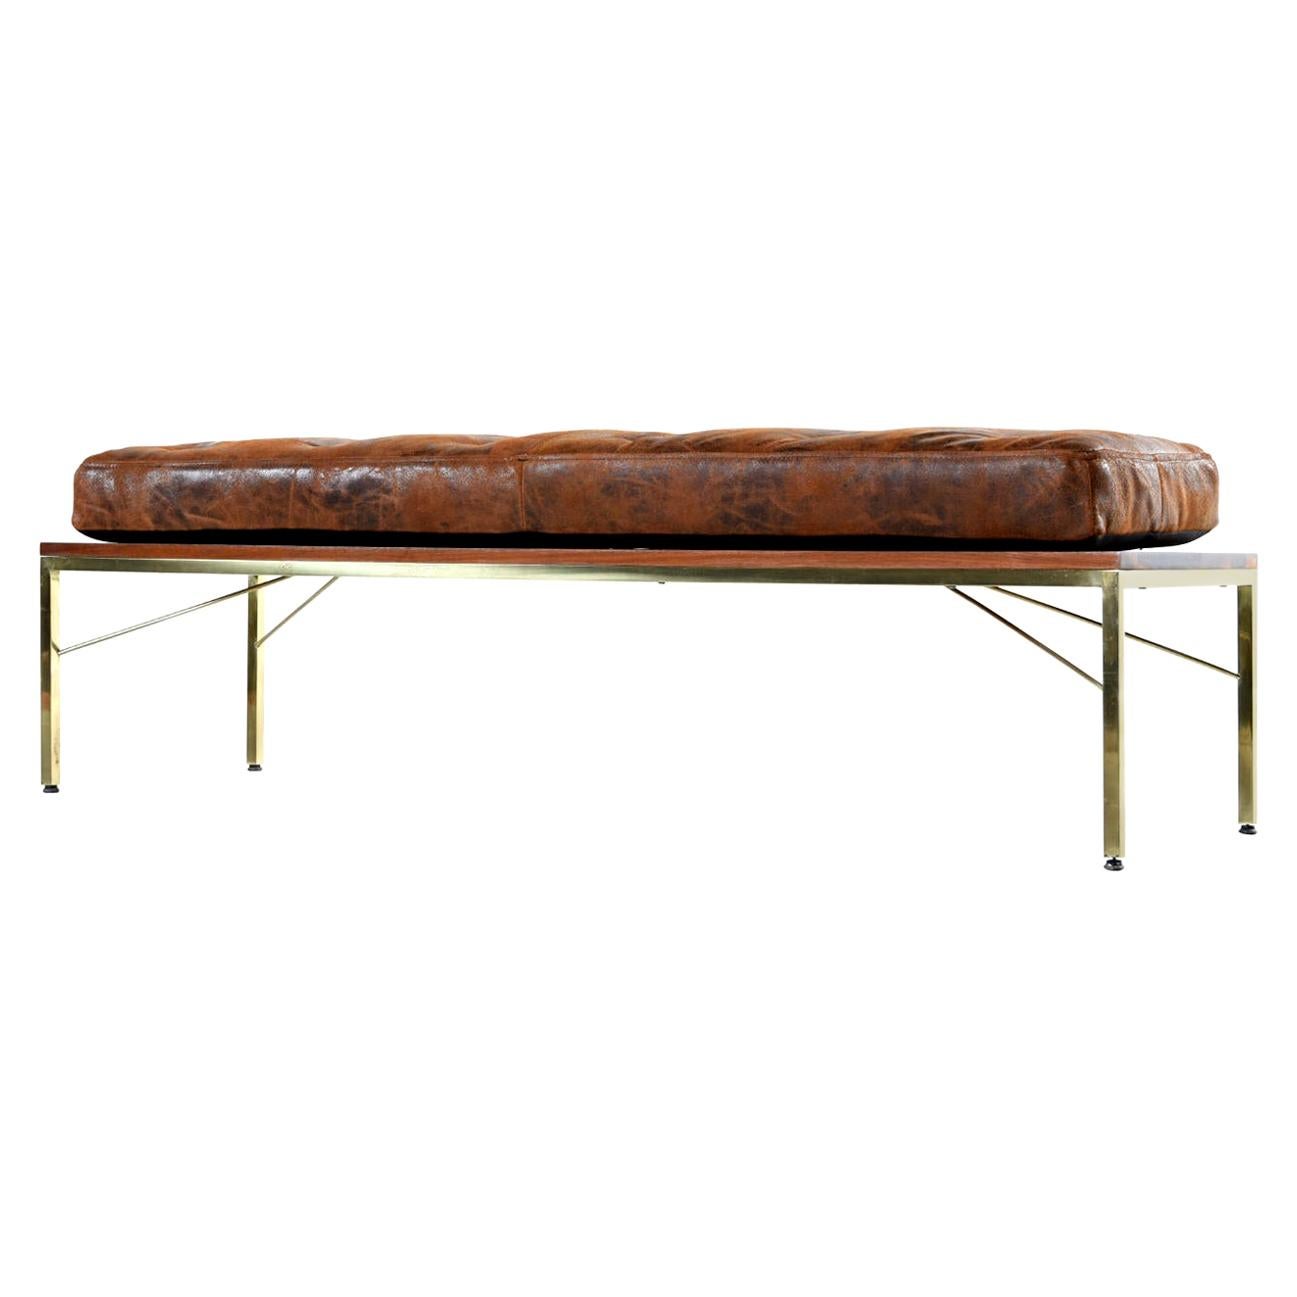 This Mid-Century Modern coffee table doubles as a bench with the addition of a newly fashioned leather cushion. The vintage 1950s era coffee table is reminiscent of Paul McCobb’s gold base ottomans. This piece features a stylish gold base with